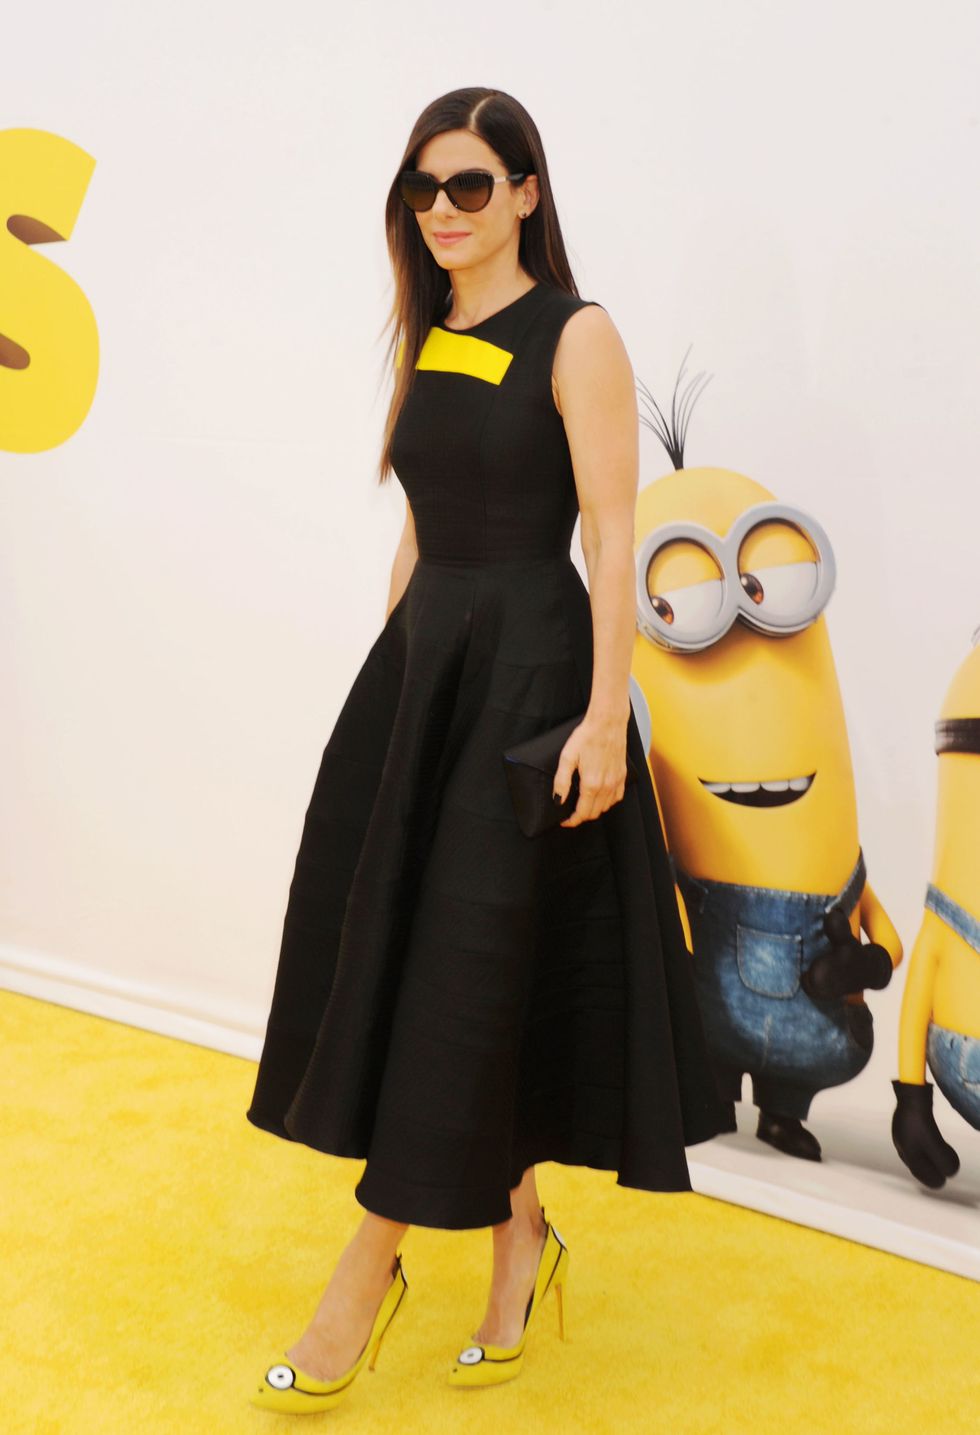 LOS ANGELES, CA - JUNE 27: Actress Sandra Bullock arrives at the premiere of Universal Pictures and Illumination Entertainment's 'Minions' at The Shrine Auditorium on June 27, 2015 in Los Angeles, California.(Photo by Jeffrey Mayer/WireImage)